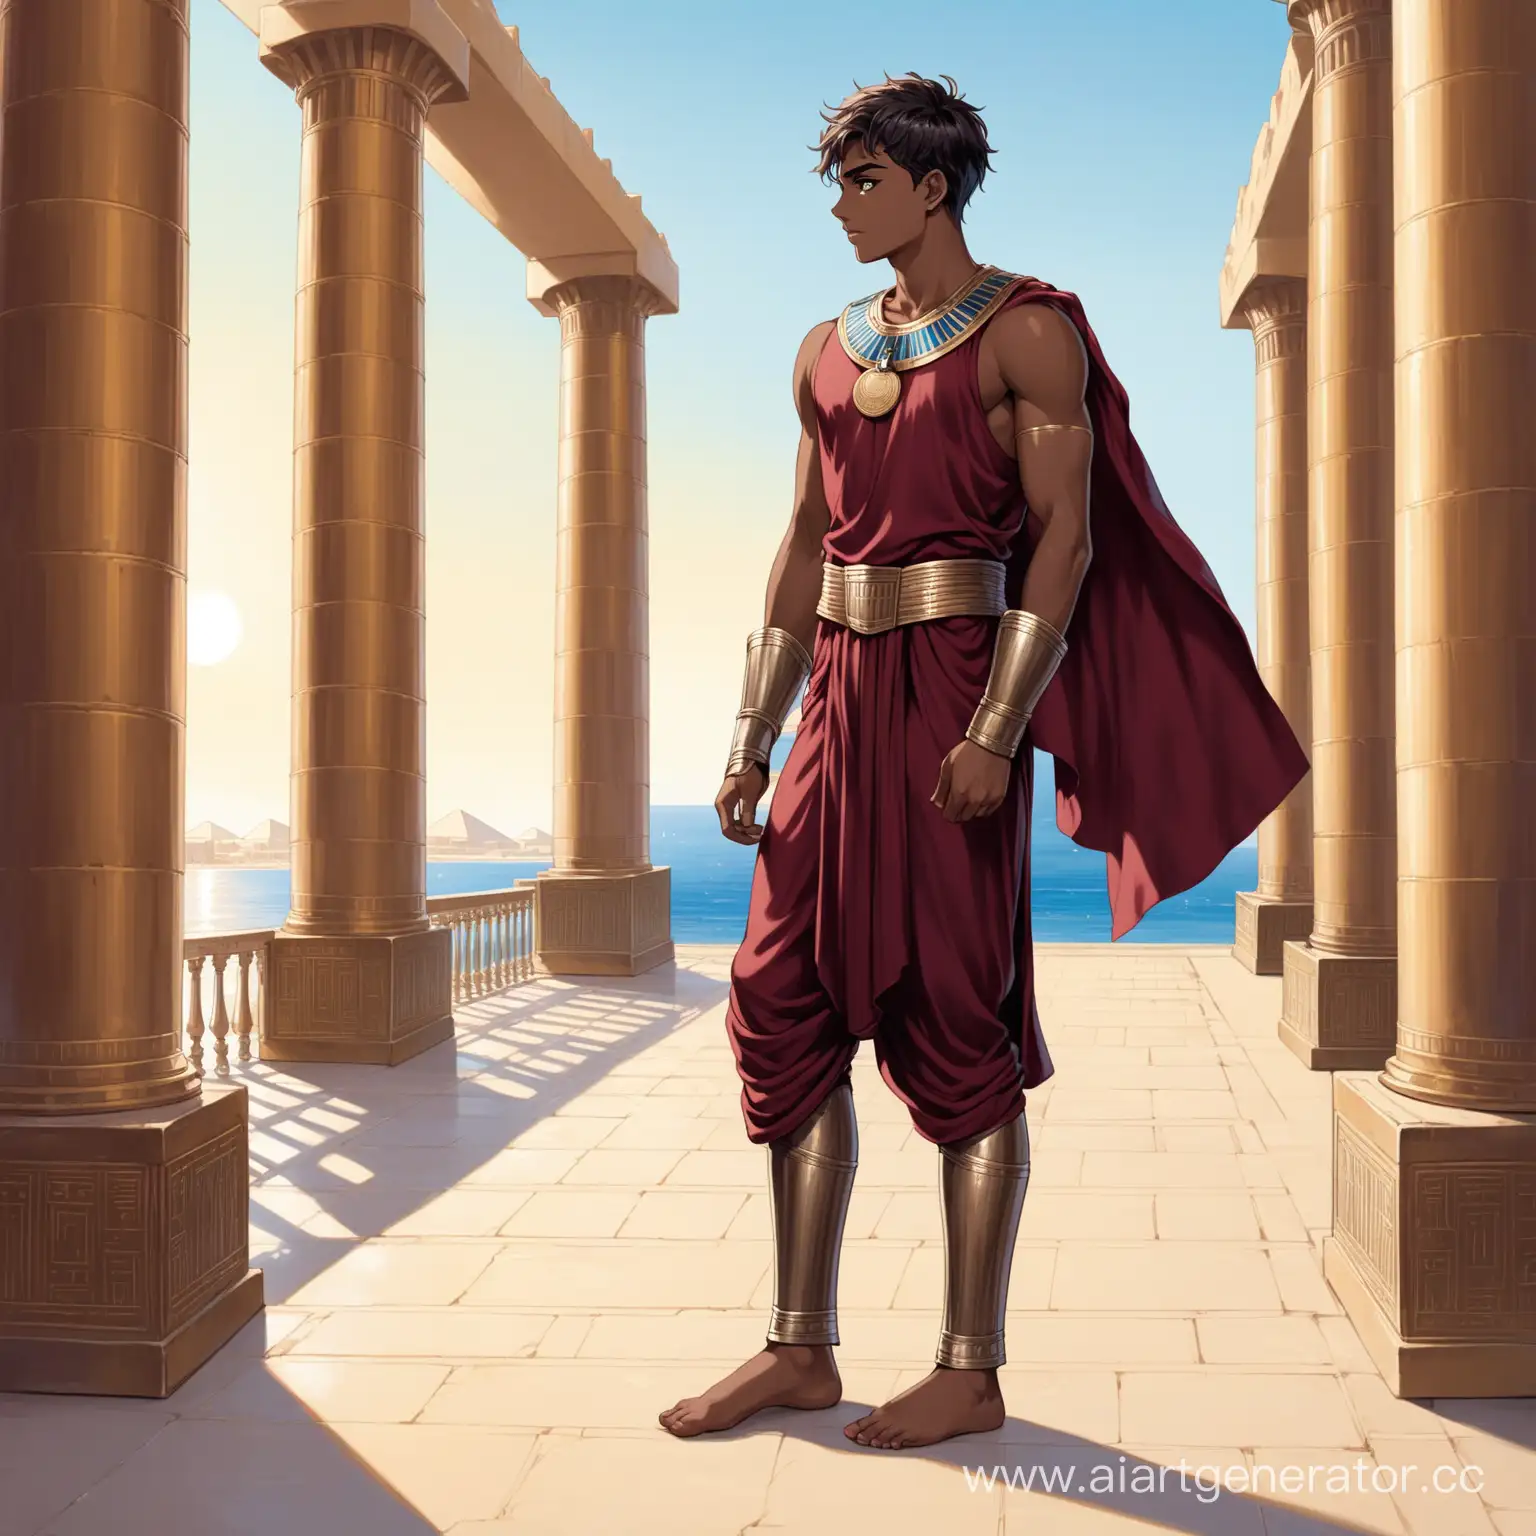 BronzeSkinned-Youth-in-Maroon-Tunic-Standing-on-Egyptian-Palace-Terrace-by-the-Sea